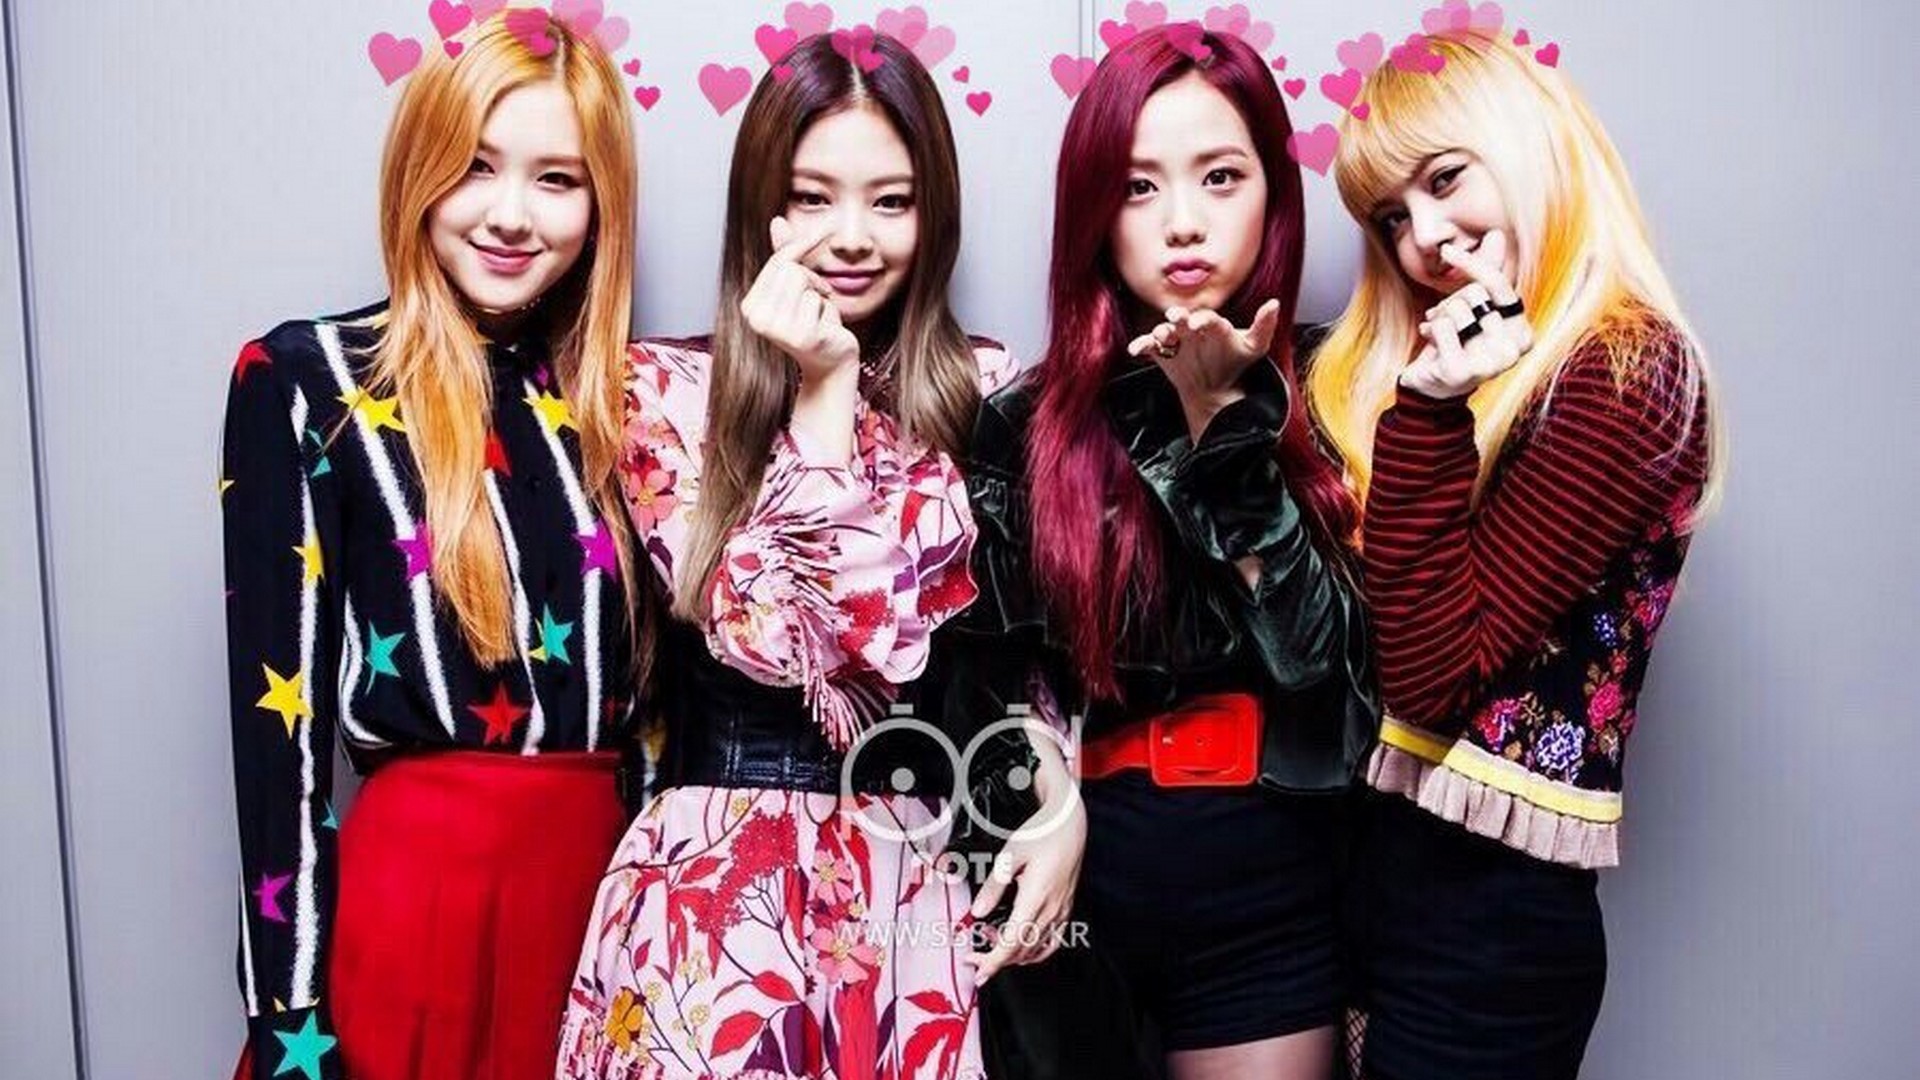 Wallpaper Blackpink Desktop With high-resolution 1920X1080 pixel. You can use this wallpaper for your Windows and Mac OS computers as well as your Android and iPhone smartphones